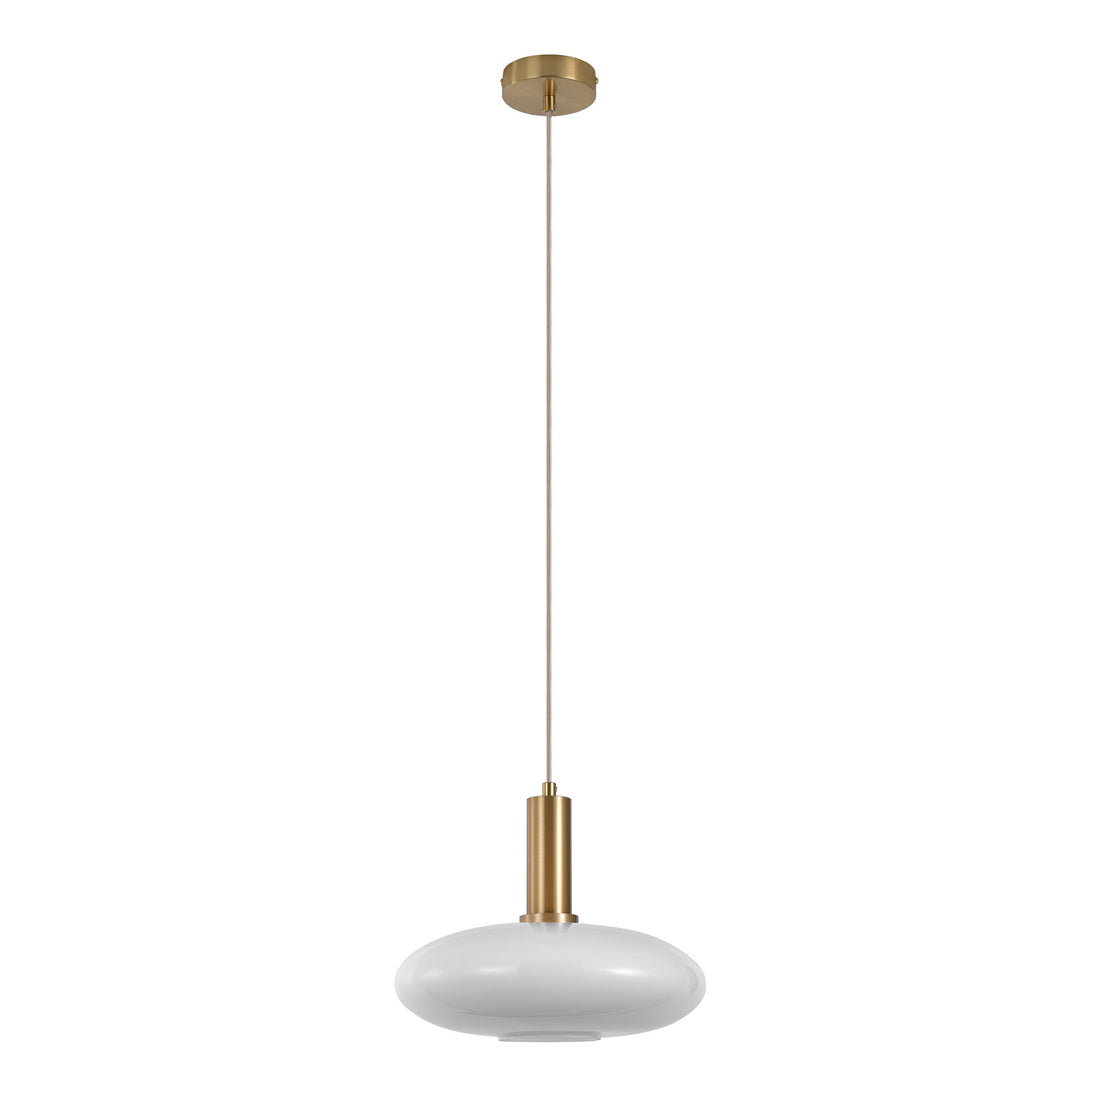 Chelsea pendant - pendant in electricity -shaped white glass and brass fring 150 cm fabric cord bulb: E27/40W - 1 - pcs